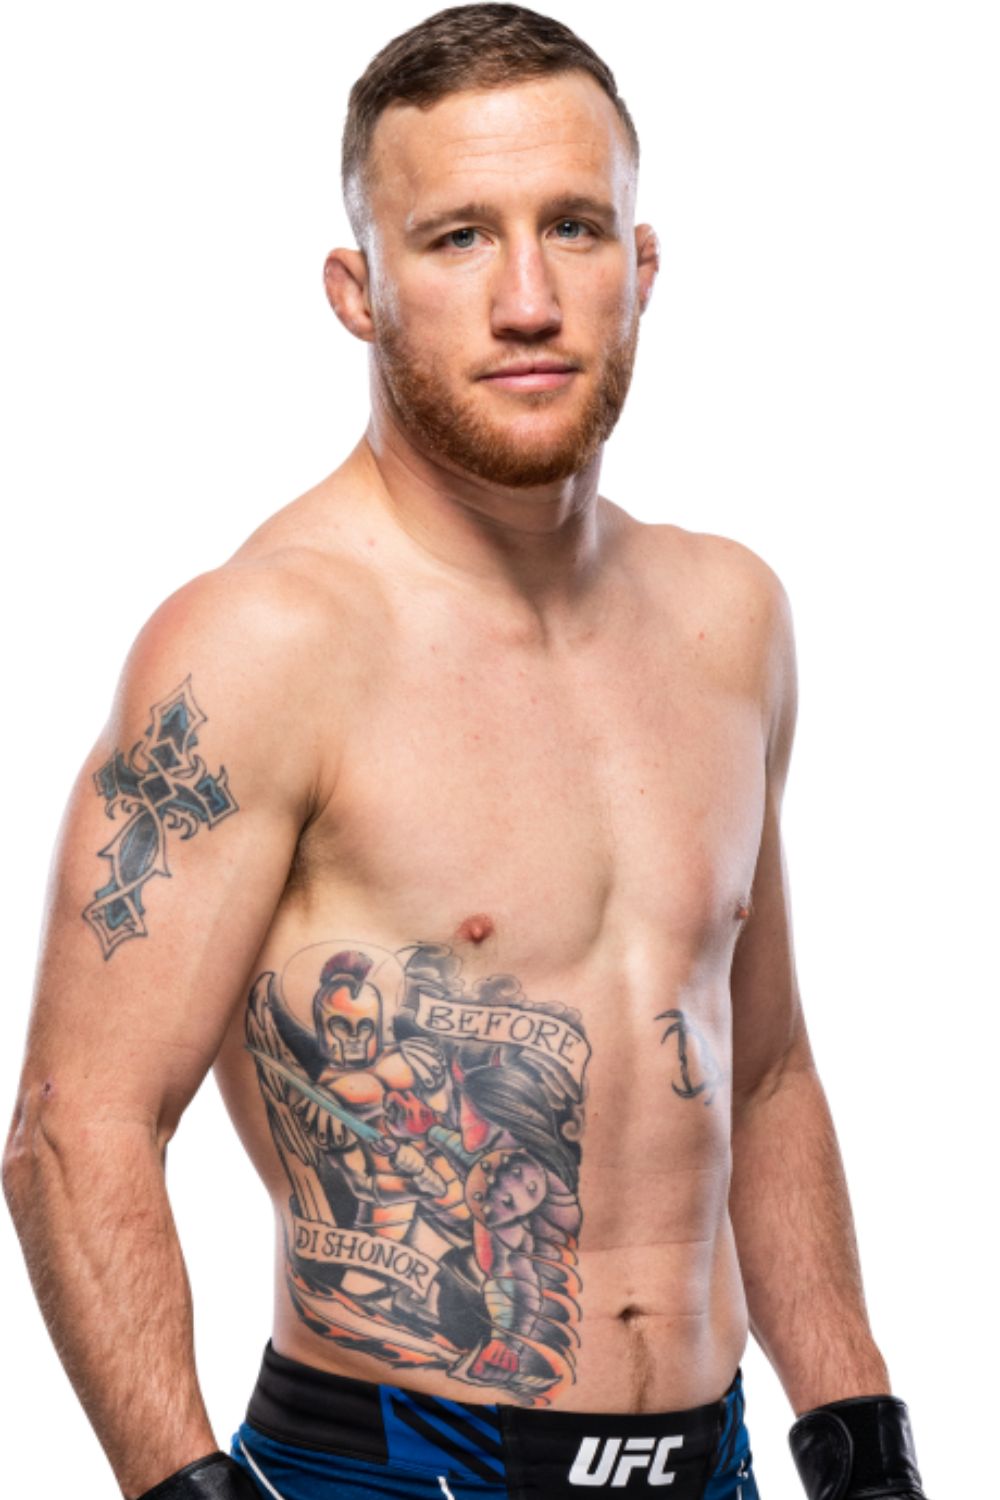 Justin Gaethje, A Professional UFC Fighter